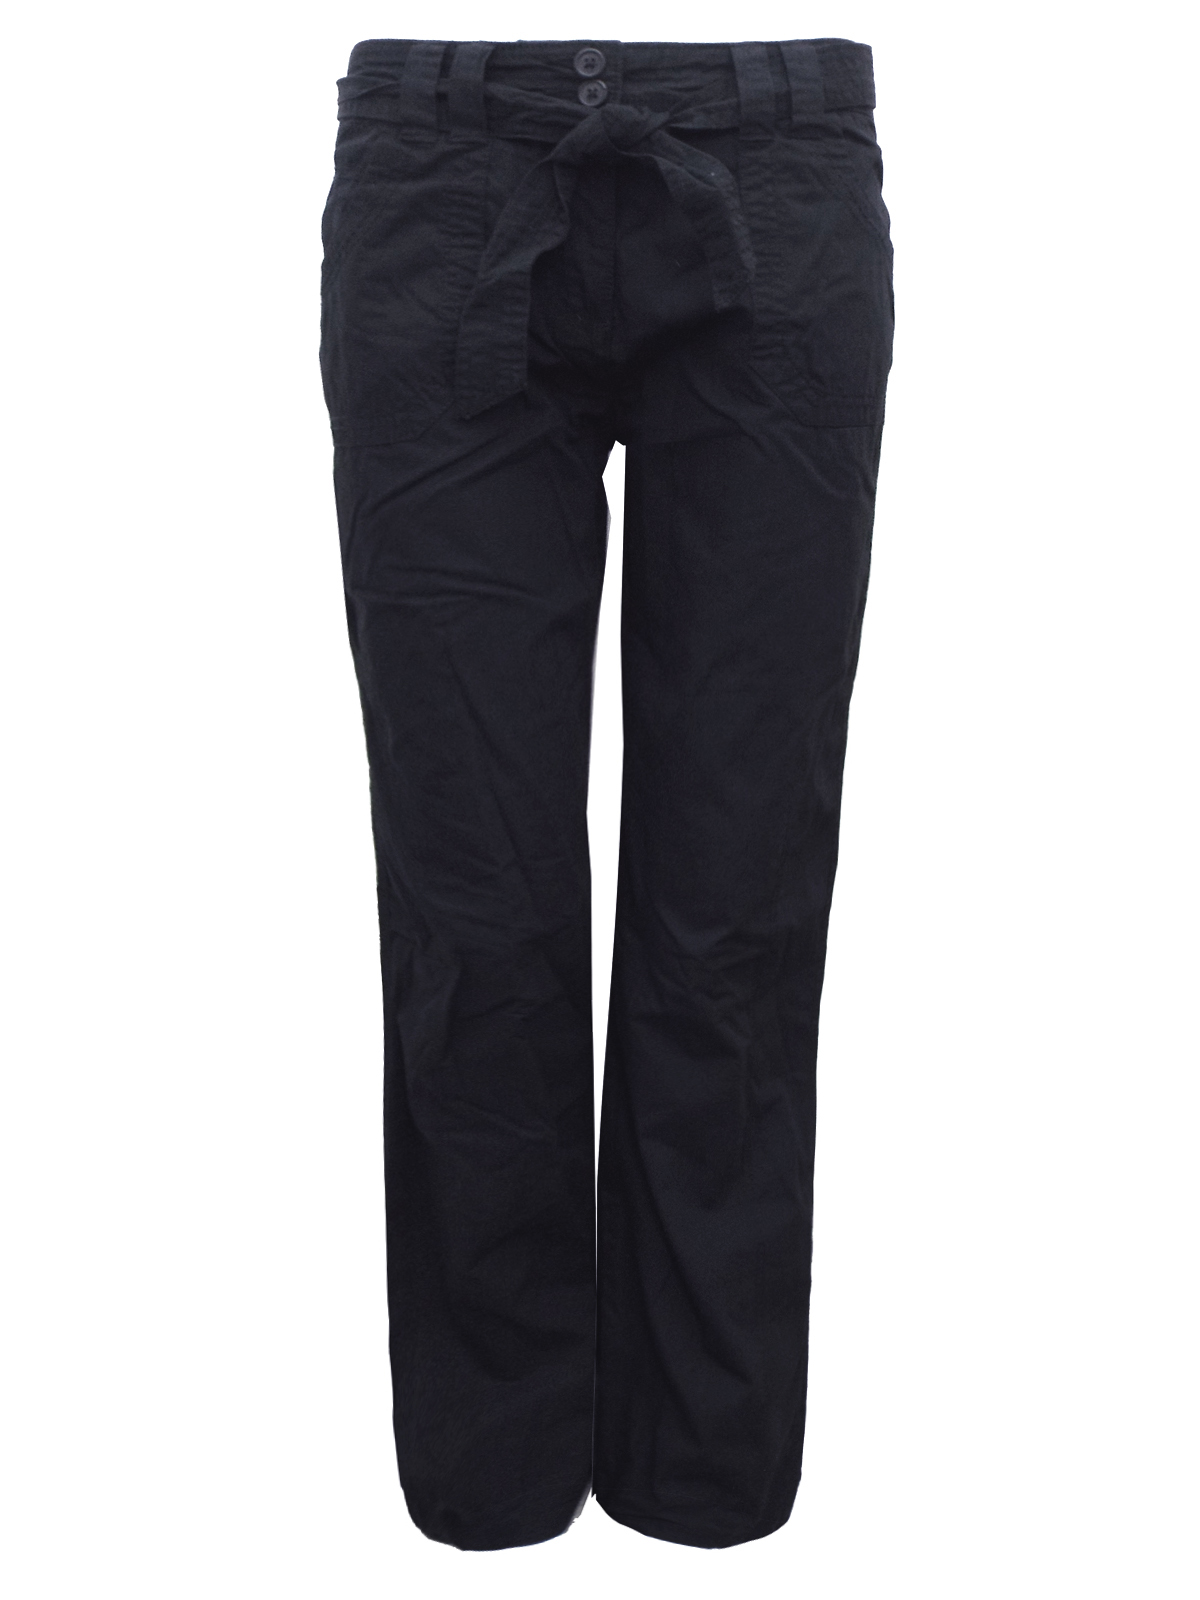 Marks and Spencer - - M&5 ASSORTED Ladies Trousers - Plus Size 14 to 20